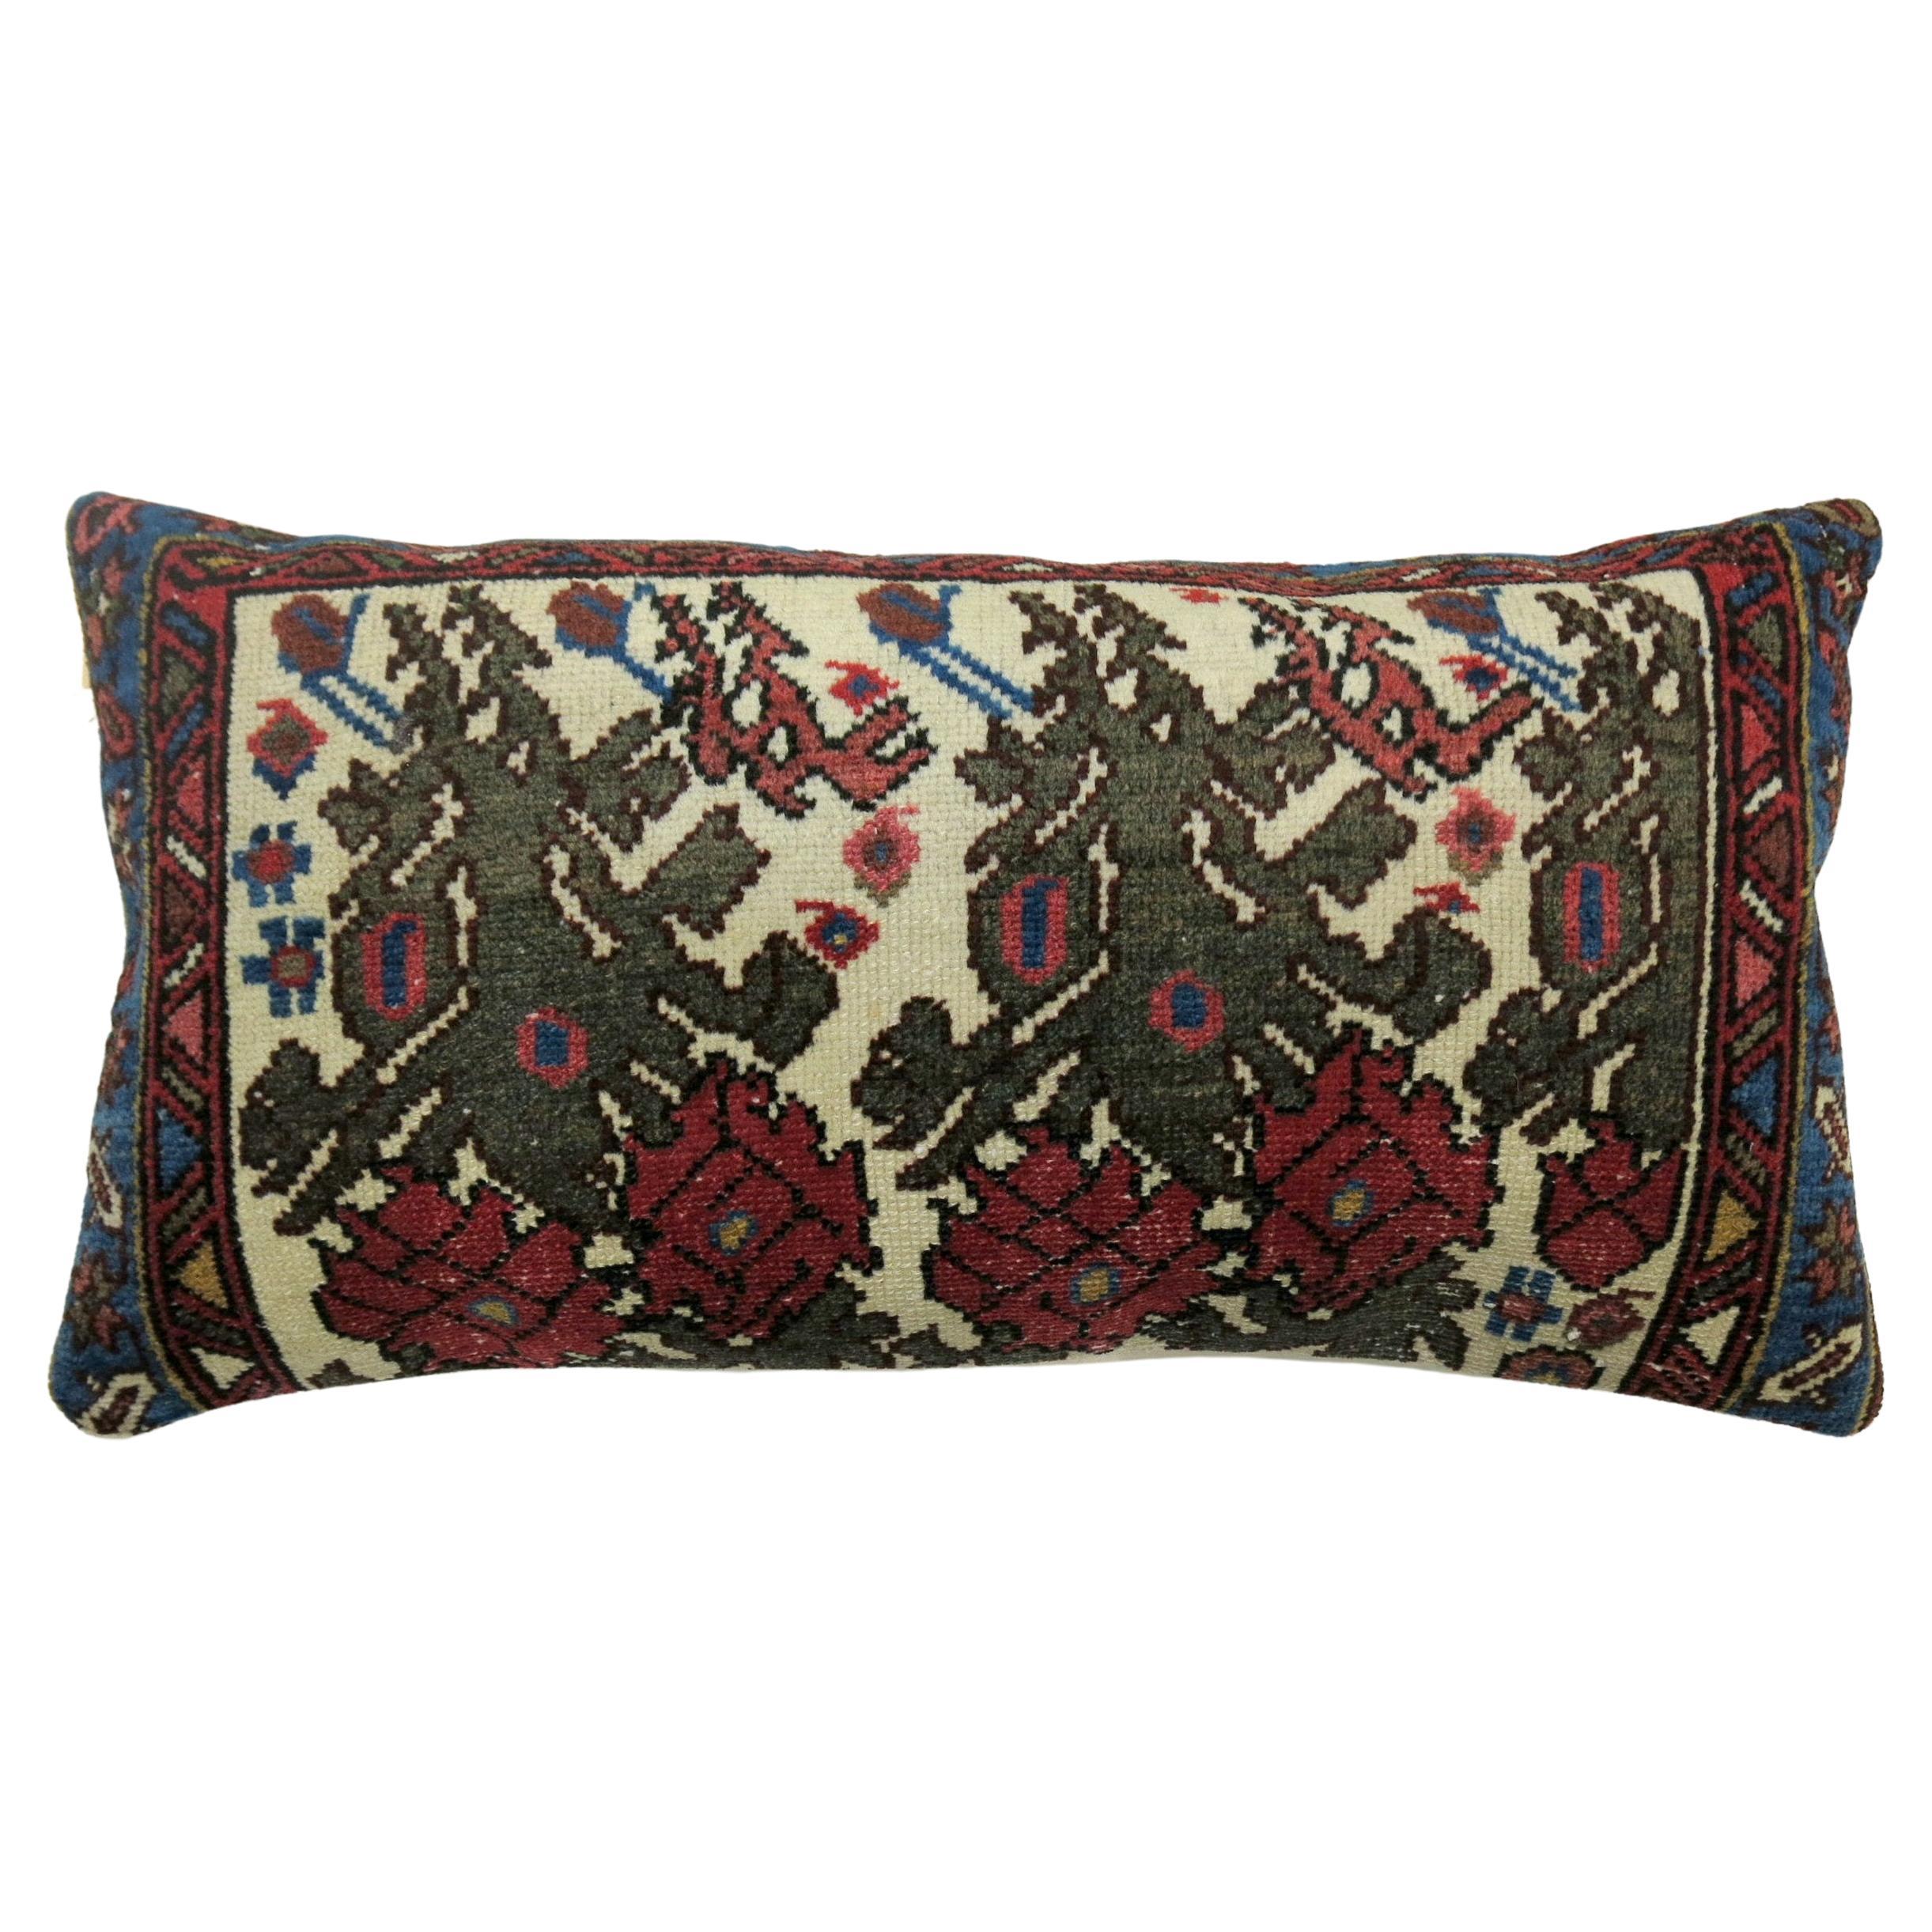  Zabihi Collection Persian Floral Antique Rug Bolster Pillow For Sale